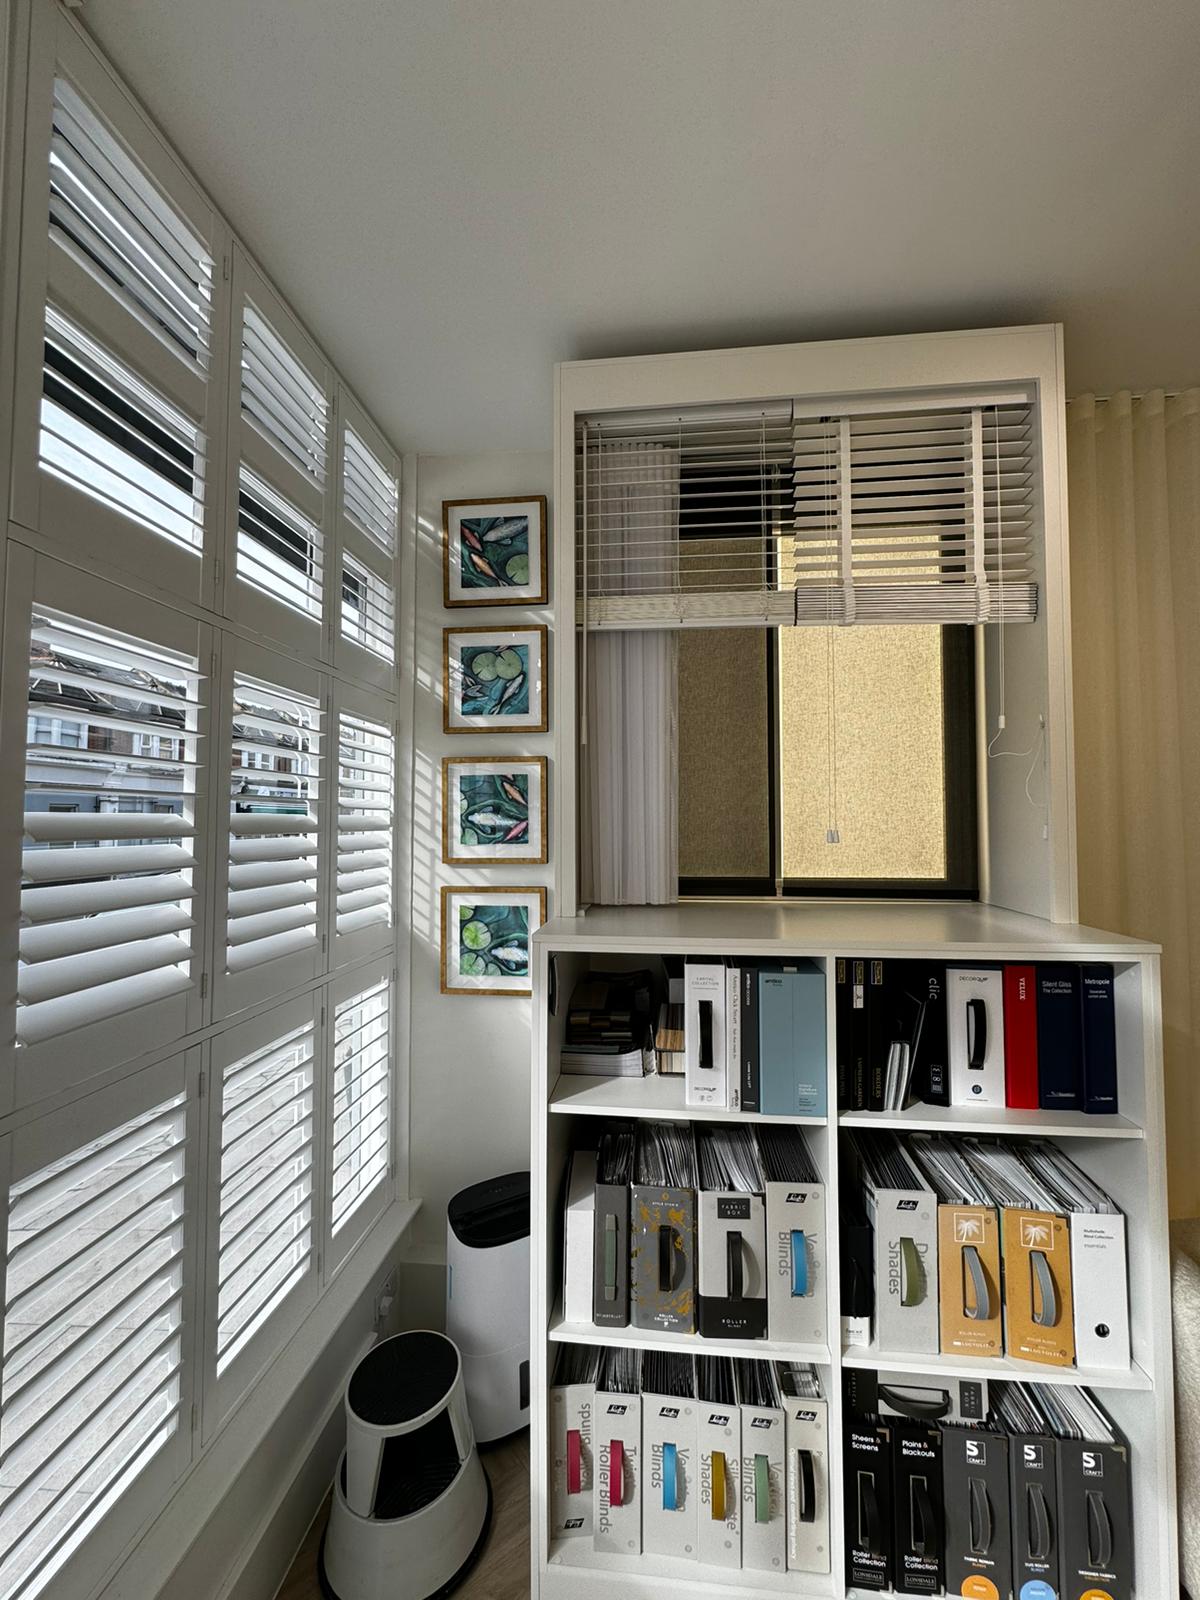 A wide range of blind and shutter samples on display in possibly the best blind and shutter shop in North London